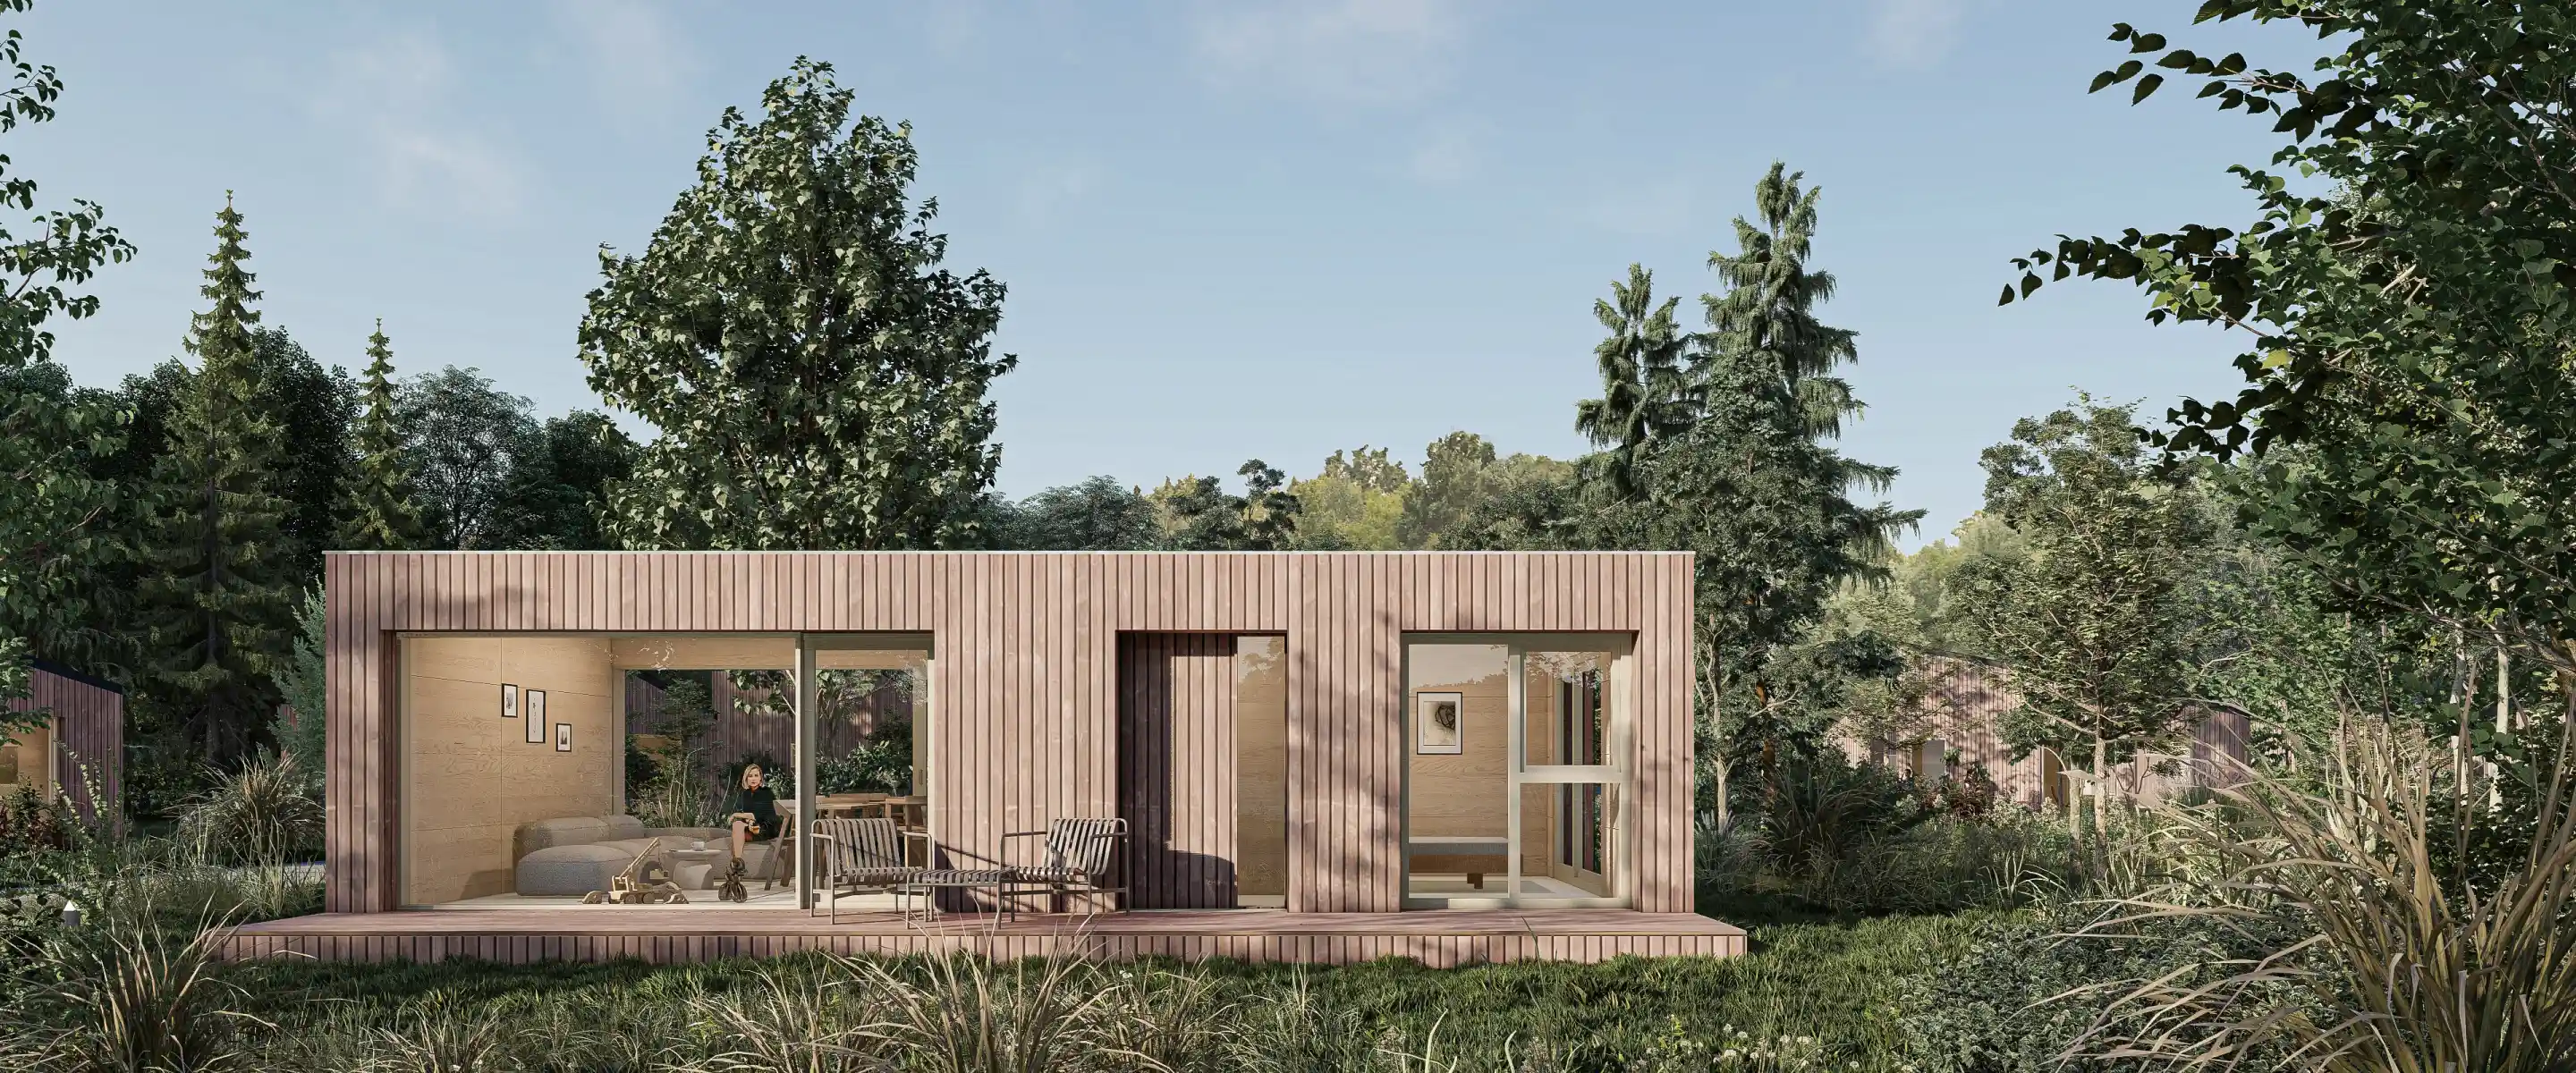 Ecospace's 50m² garden room with a flat roof design